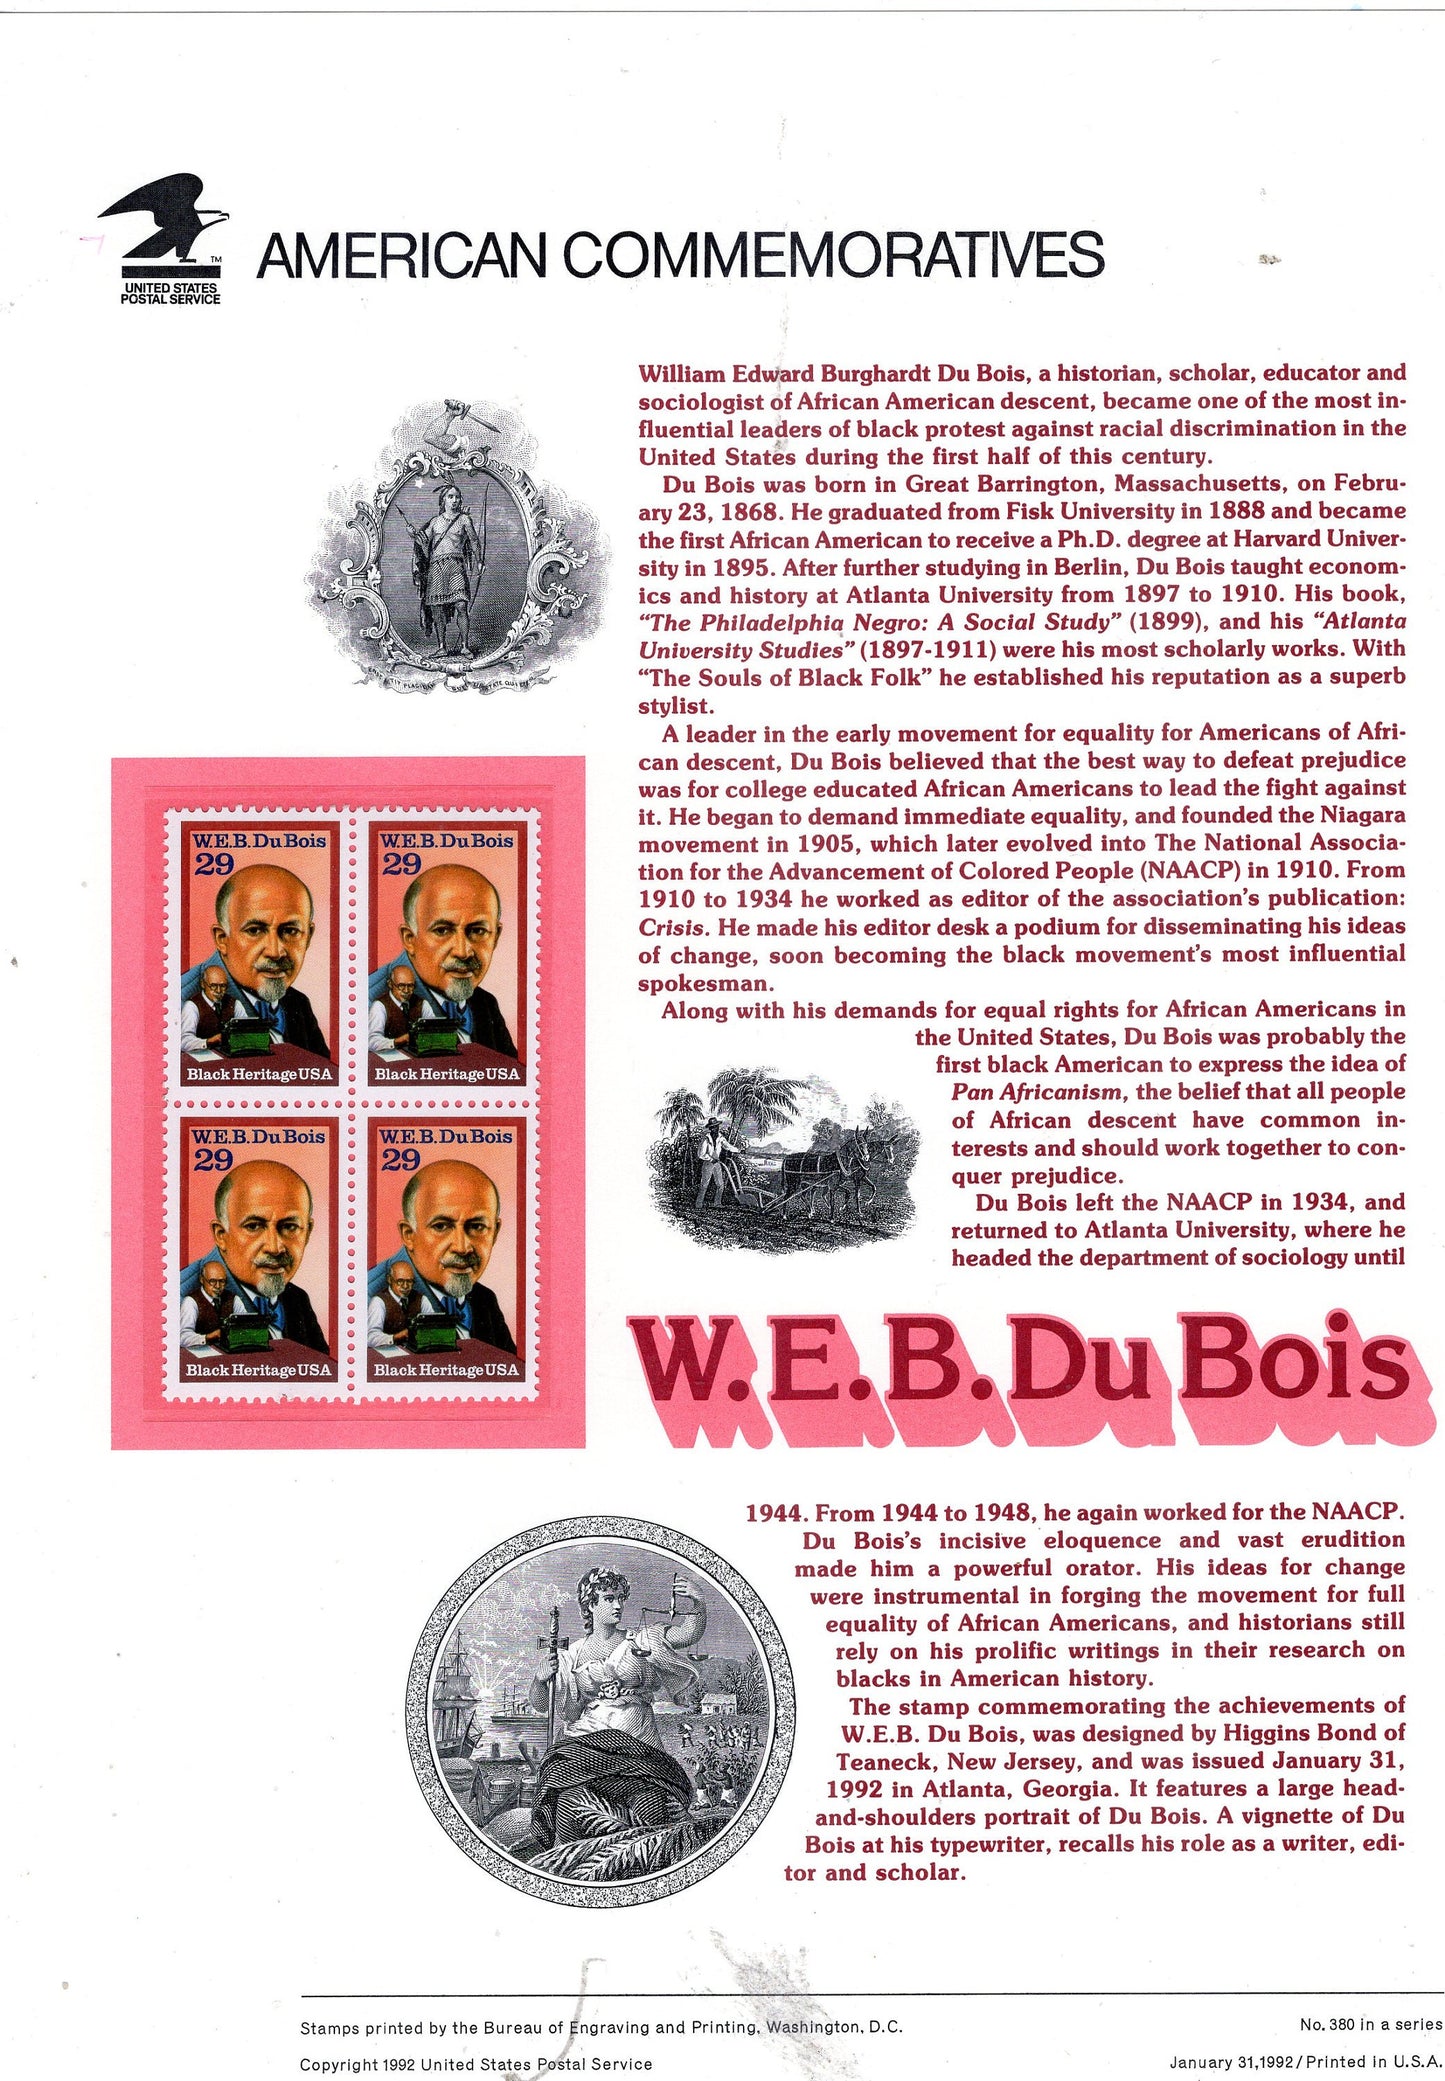 W.E.B. DeBois BLACK HERITAGE Rights Commemorative Panel w/Block of 4 Stamps Illustrations plus Text – A Great Gift 8.5x11-Year 1992 #380-